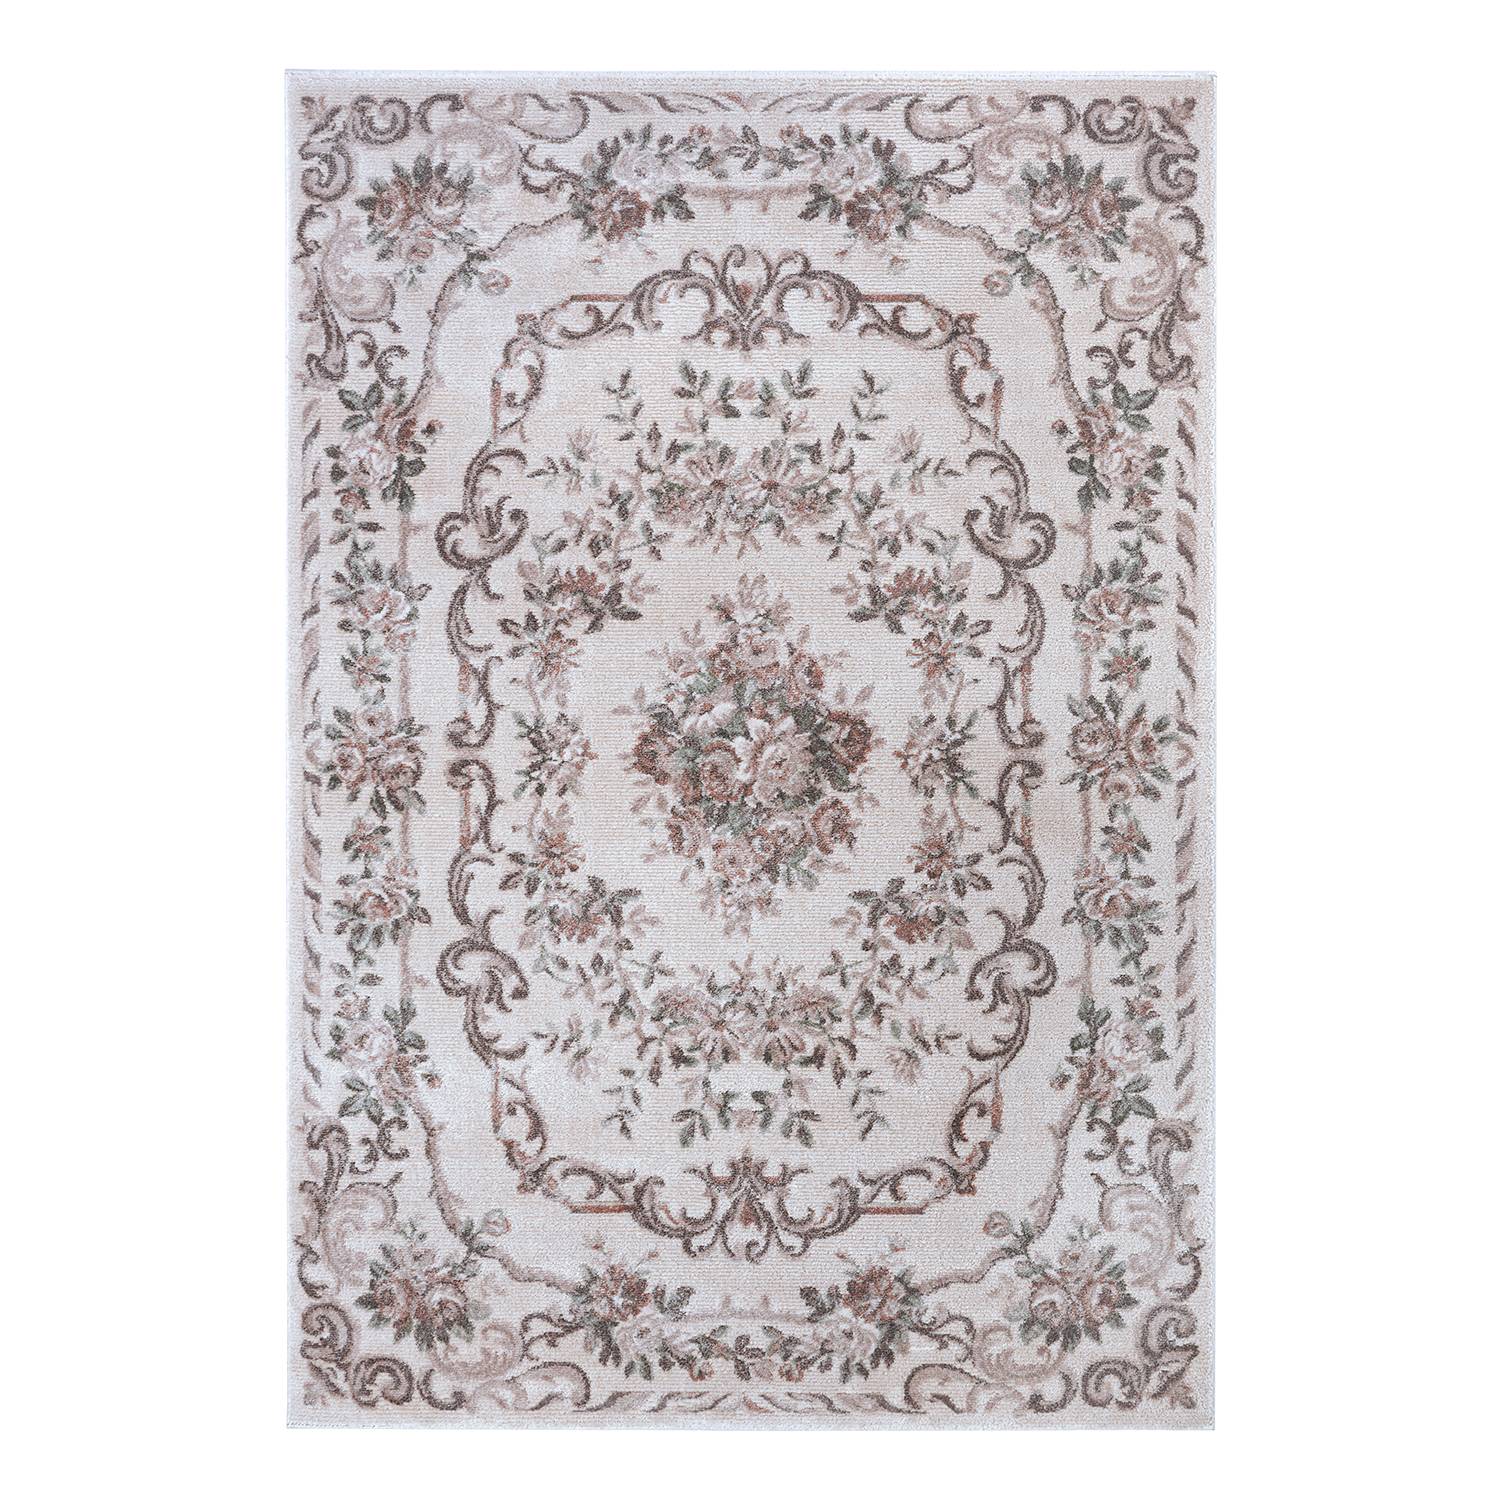 Image of Tapis Aubusson Flore 000000001000244241